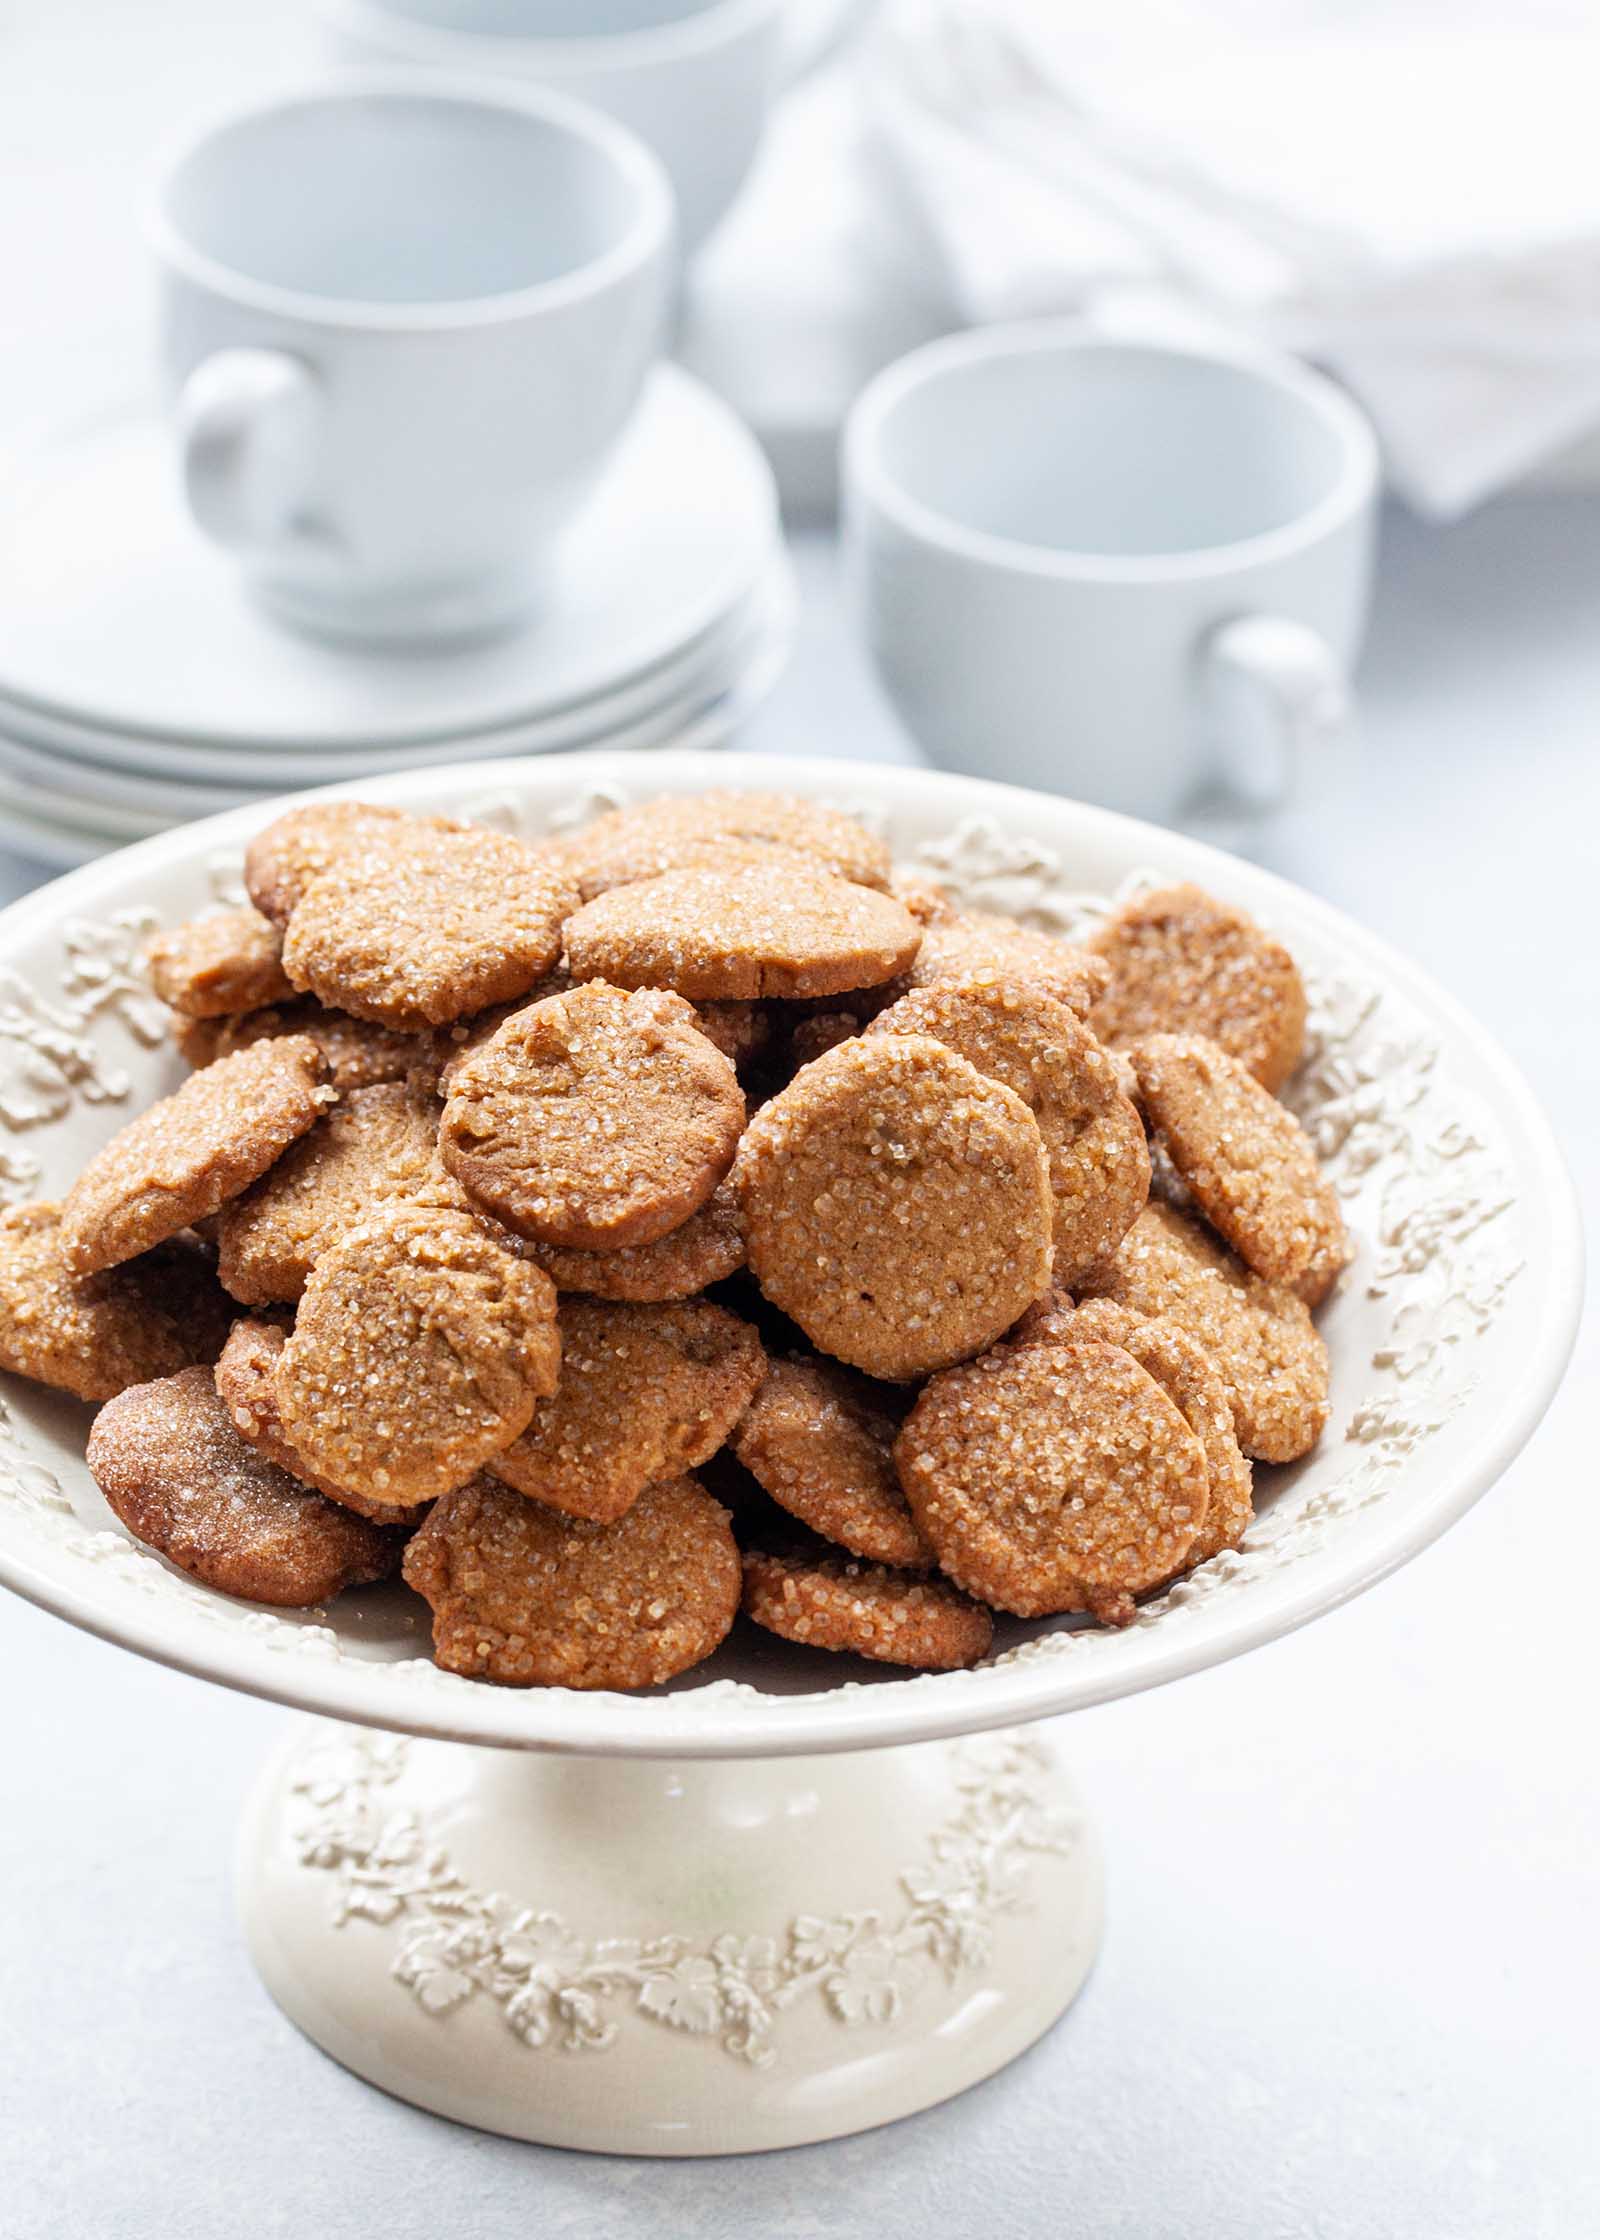 Make Ahead Slice and Bake Ginger Cookies heaped on a cake stand with coffee mugs and dessert plates set behind.